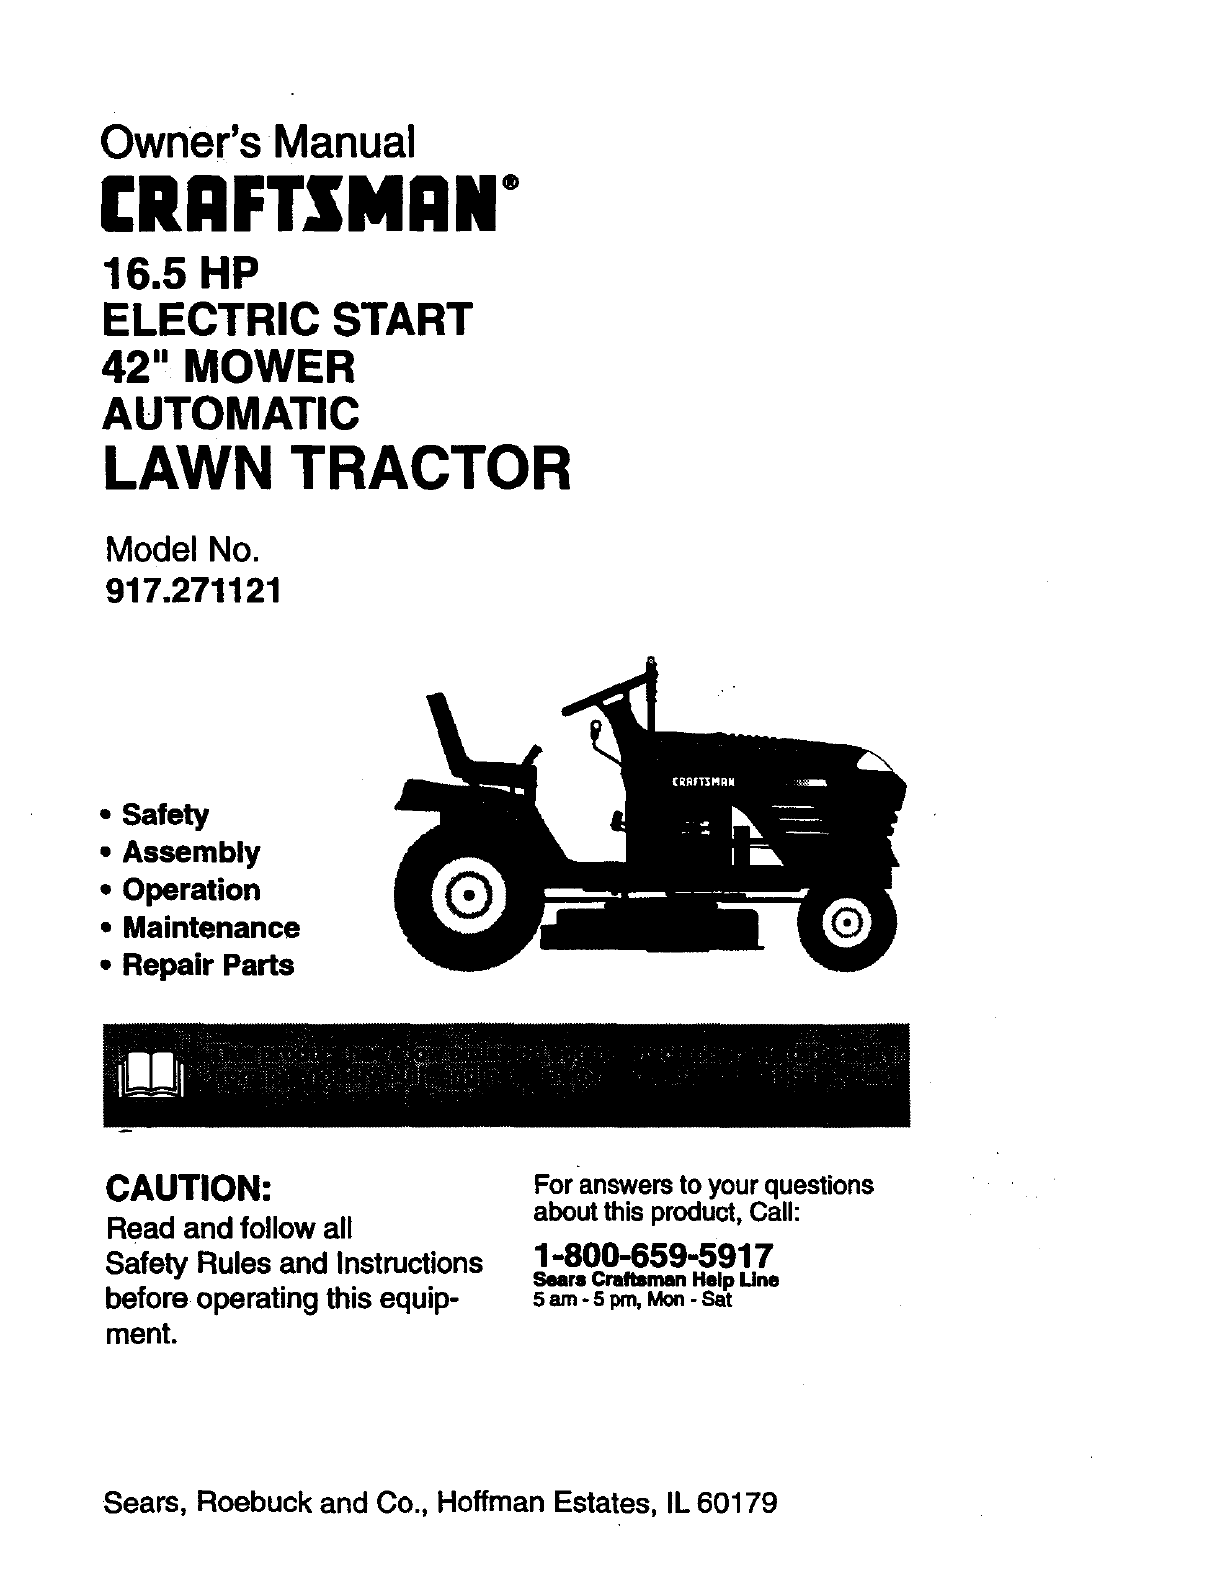 Craftsman 917271121 User Manual 16.5 HP ELECTRIC START AUTOMATIC 42 LAWN  TRACTOR Manuals And Guides 98120014  UserManual.wiki